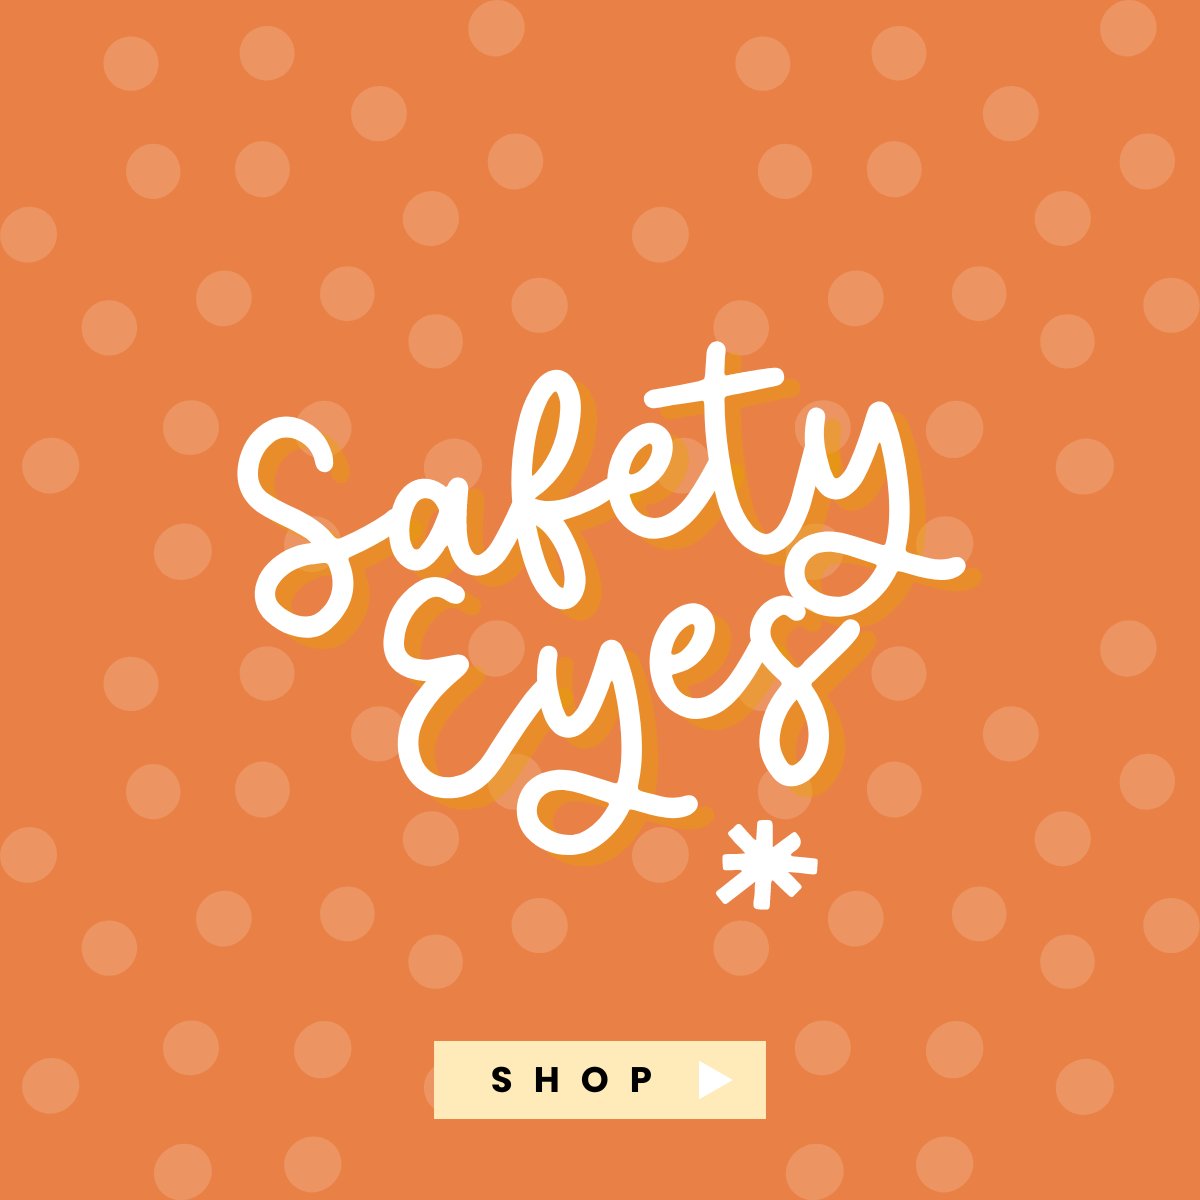 Safety Eyes – 3amgracedesigns